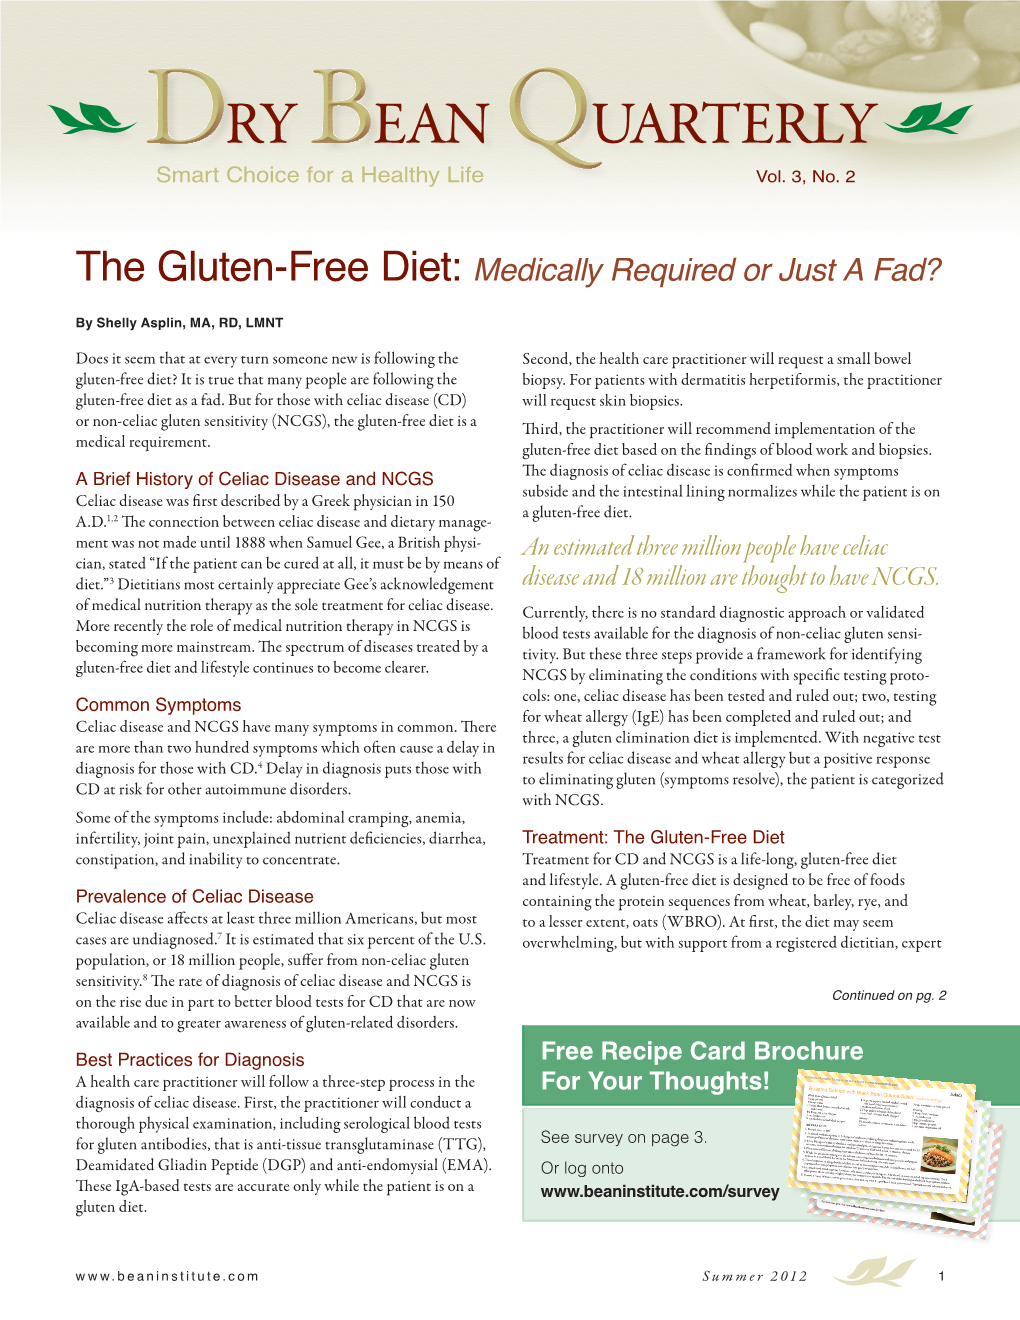 The Gluten-Free Diet: Medically Required Or Just a Fad?